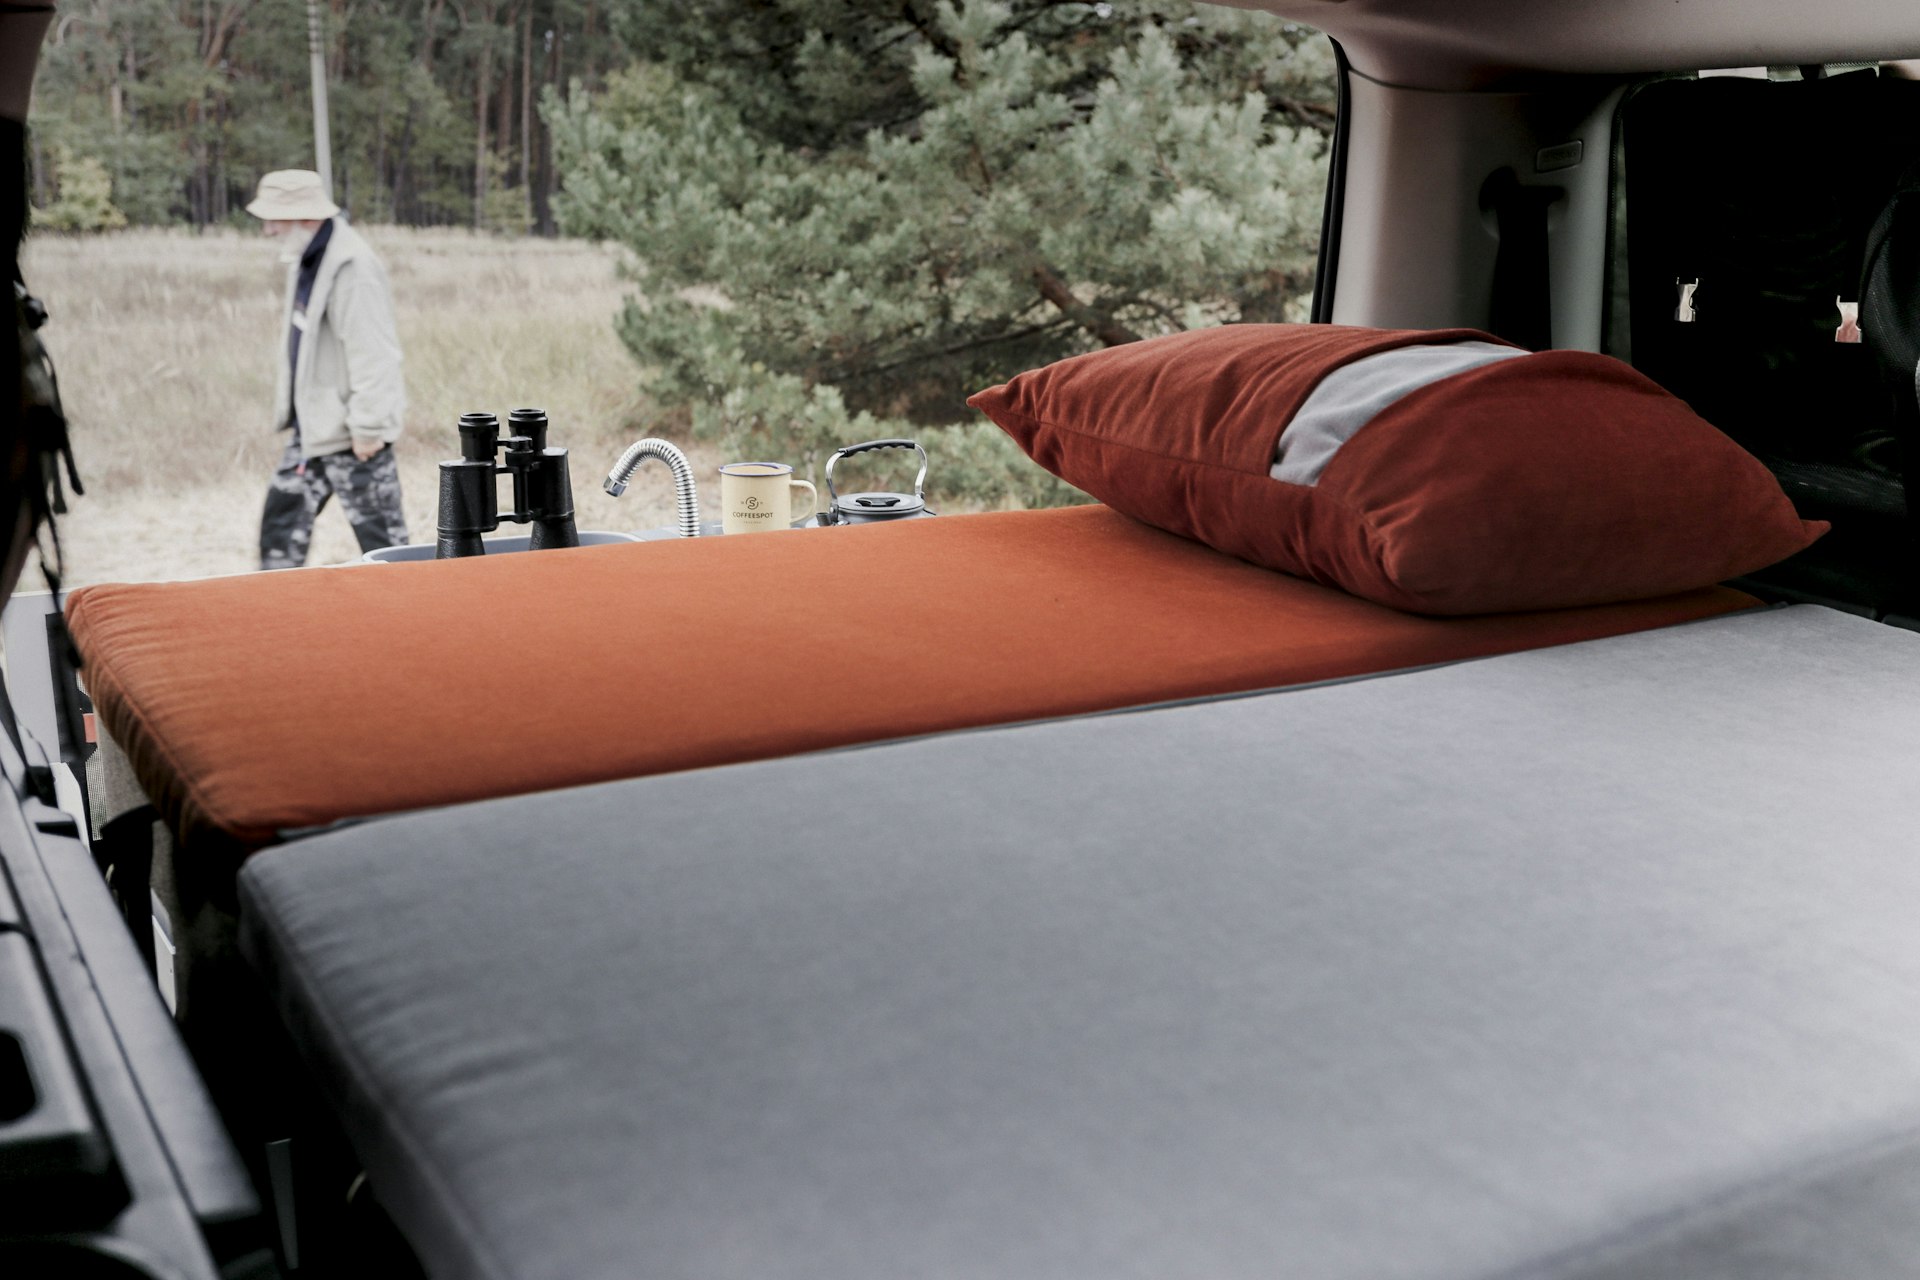 A foldable mattress on display in the trunk of an SUV